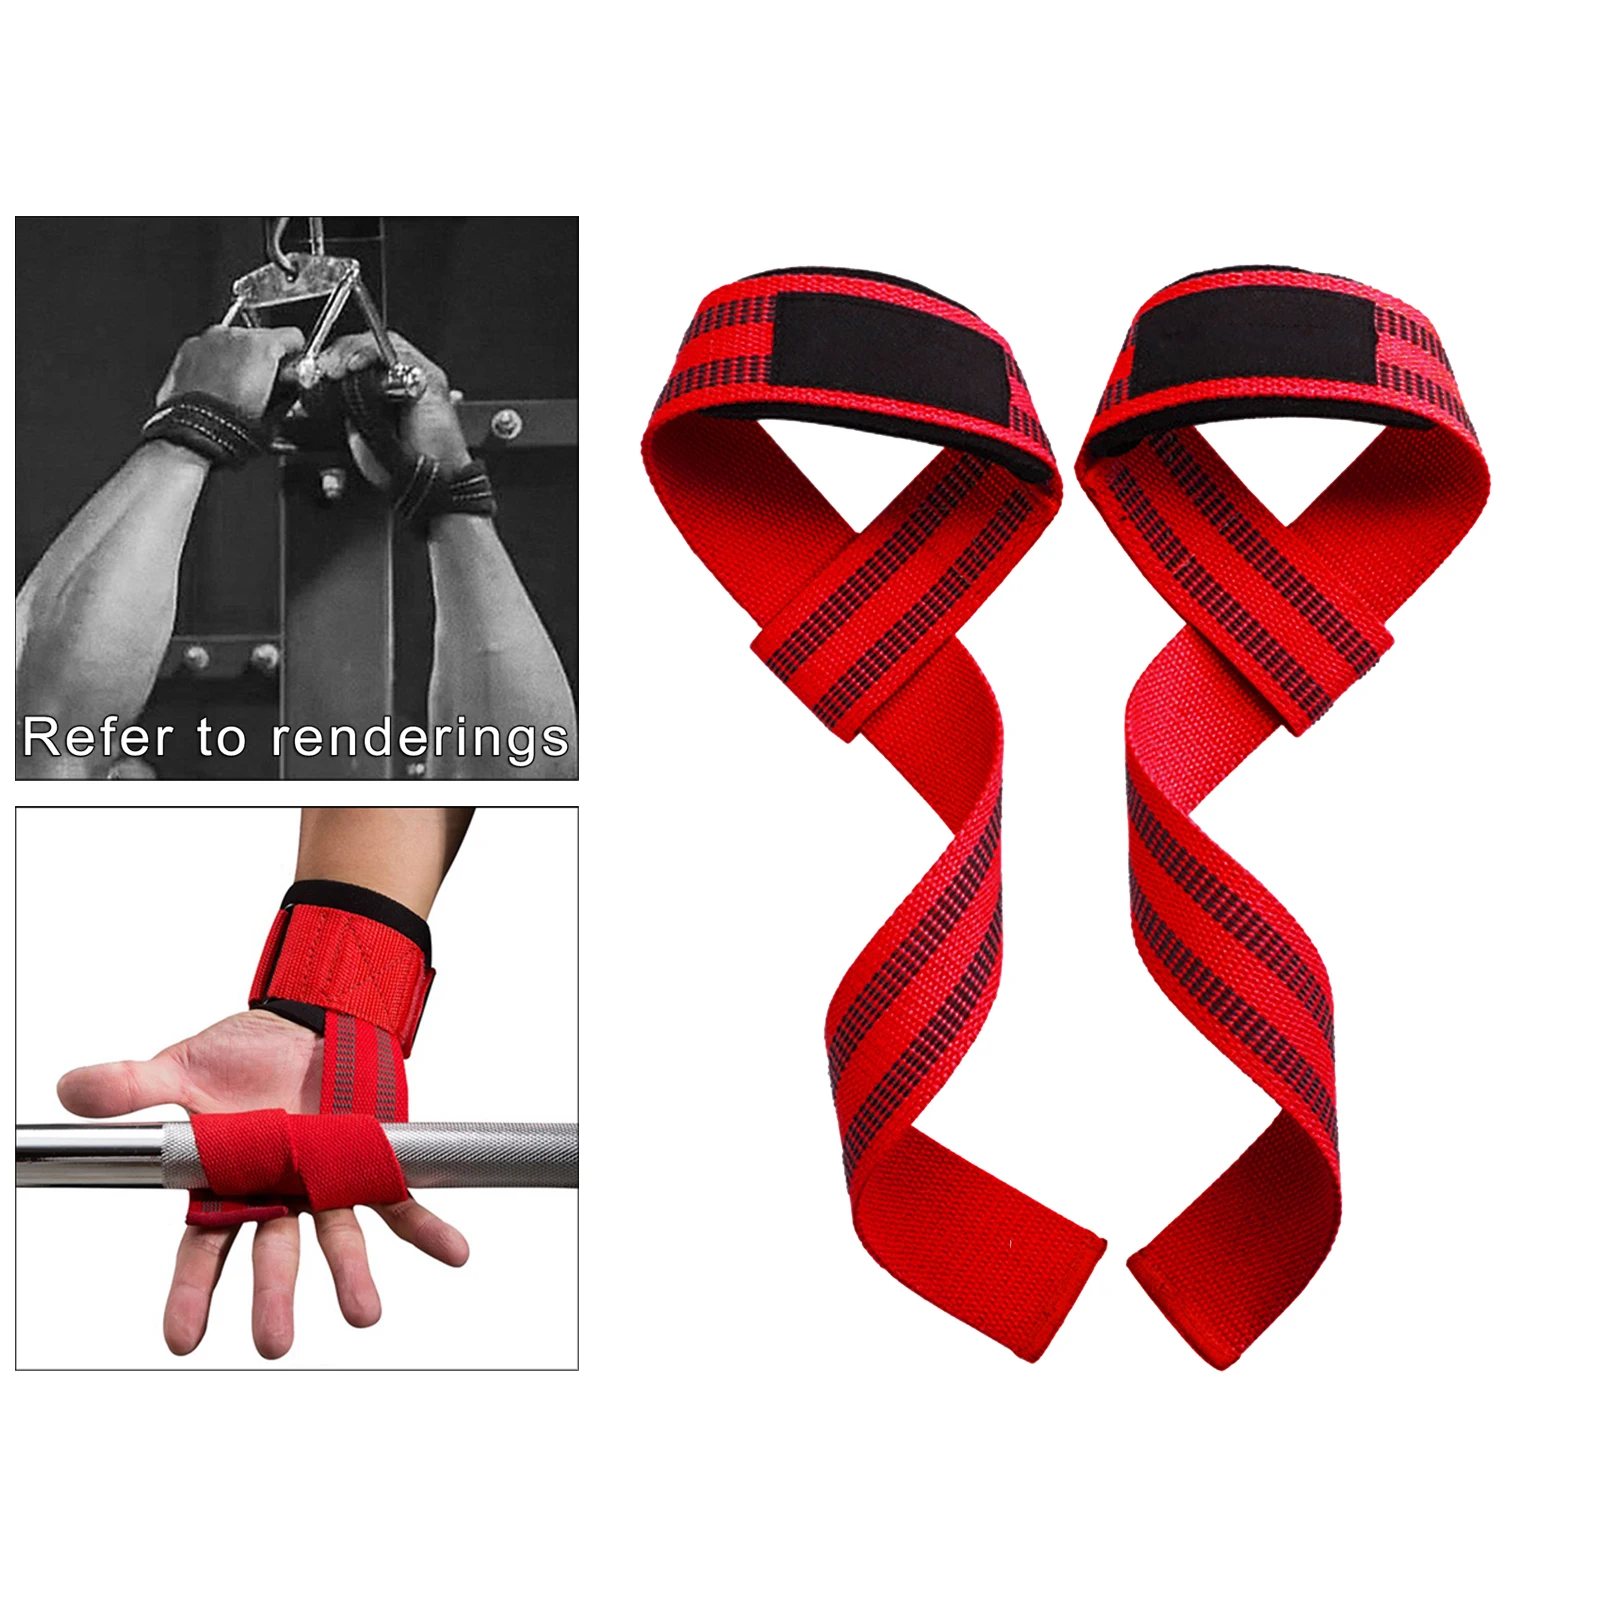 1Pair Weight Lifting Straps Durable Padded Wrist Support Wraps Powerlifting Strength Deadlift Home Gym Adjustable Unisex